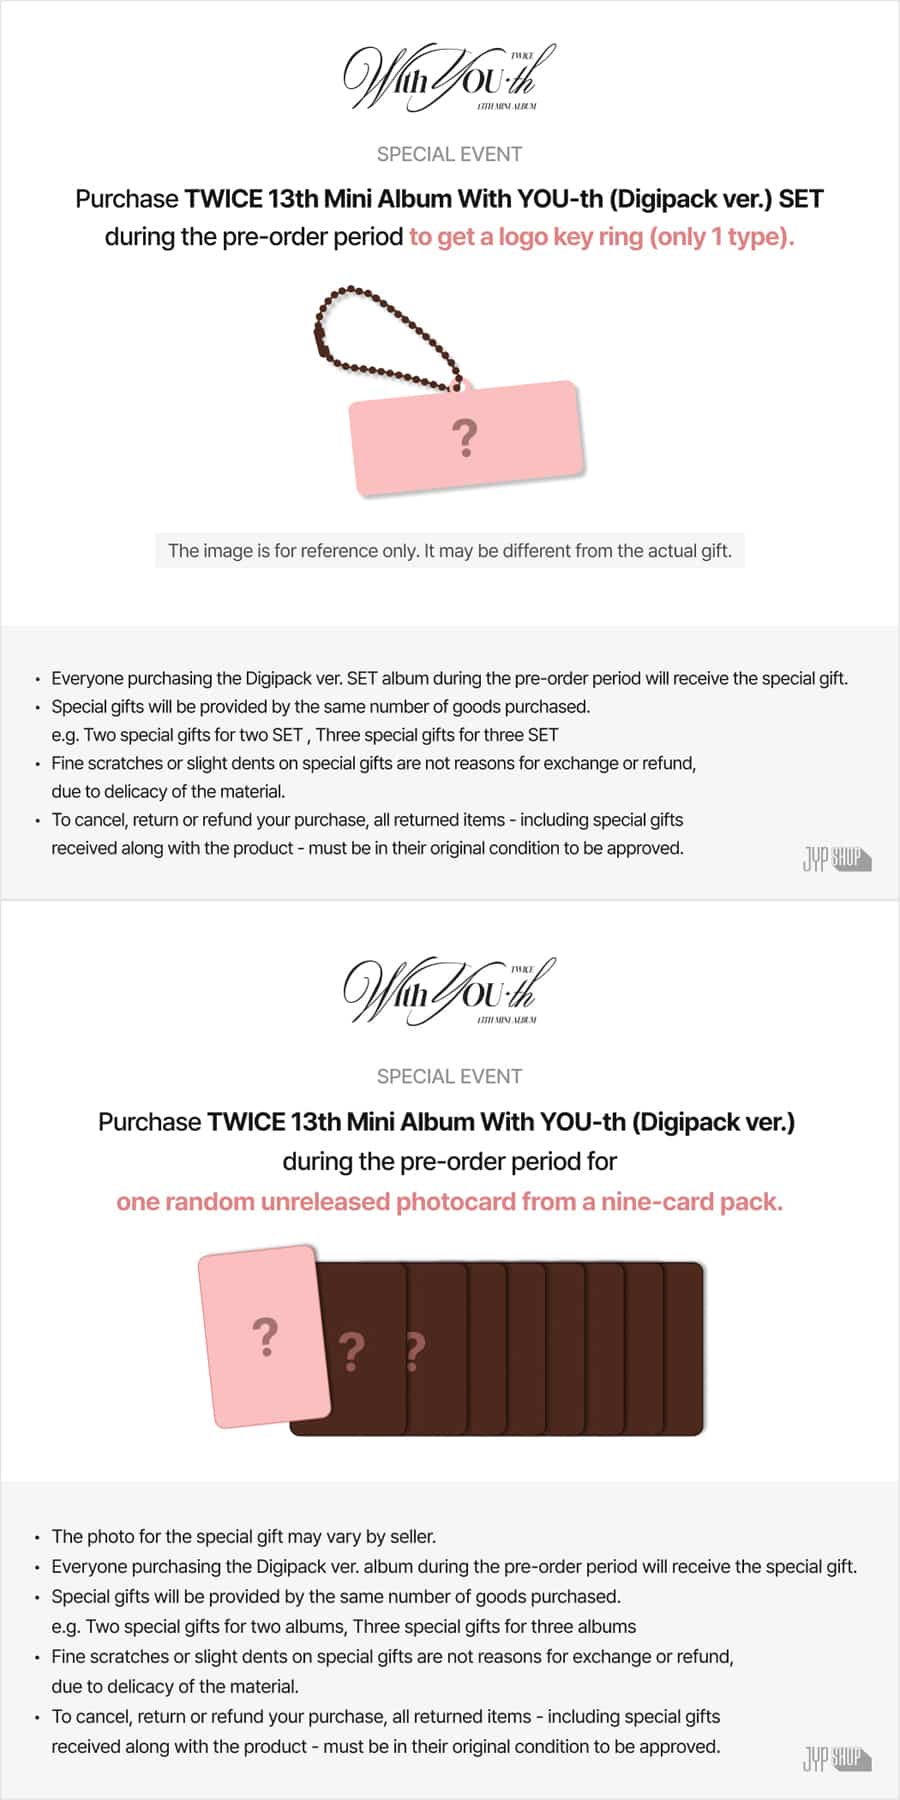 jyp-shop-pob-twice-with-you-th-digipack-ver-wholesale